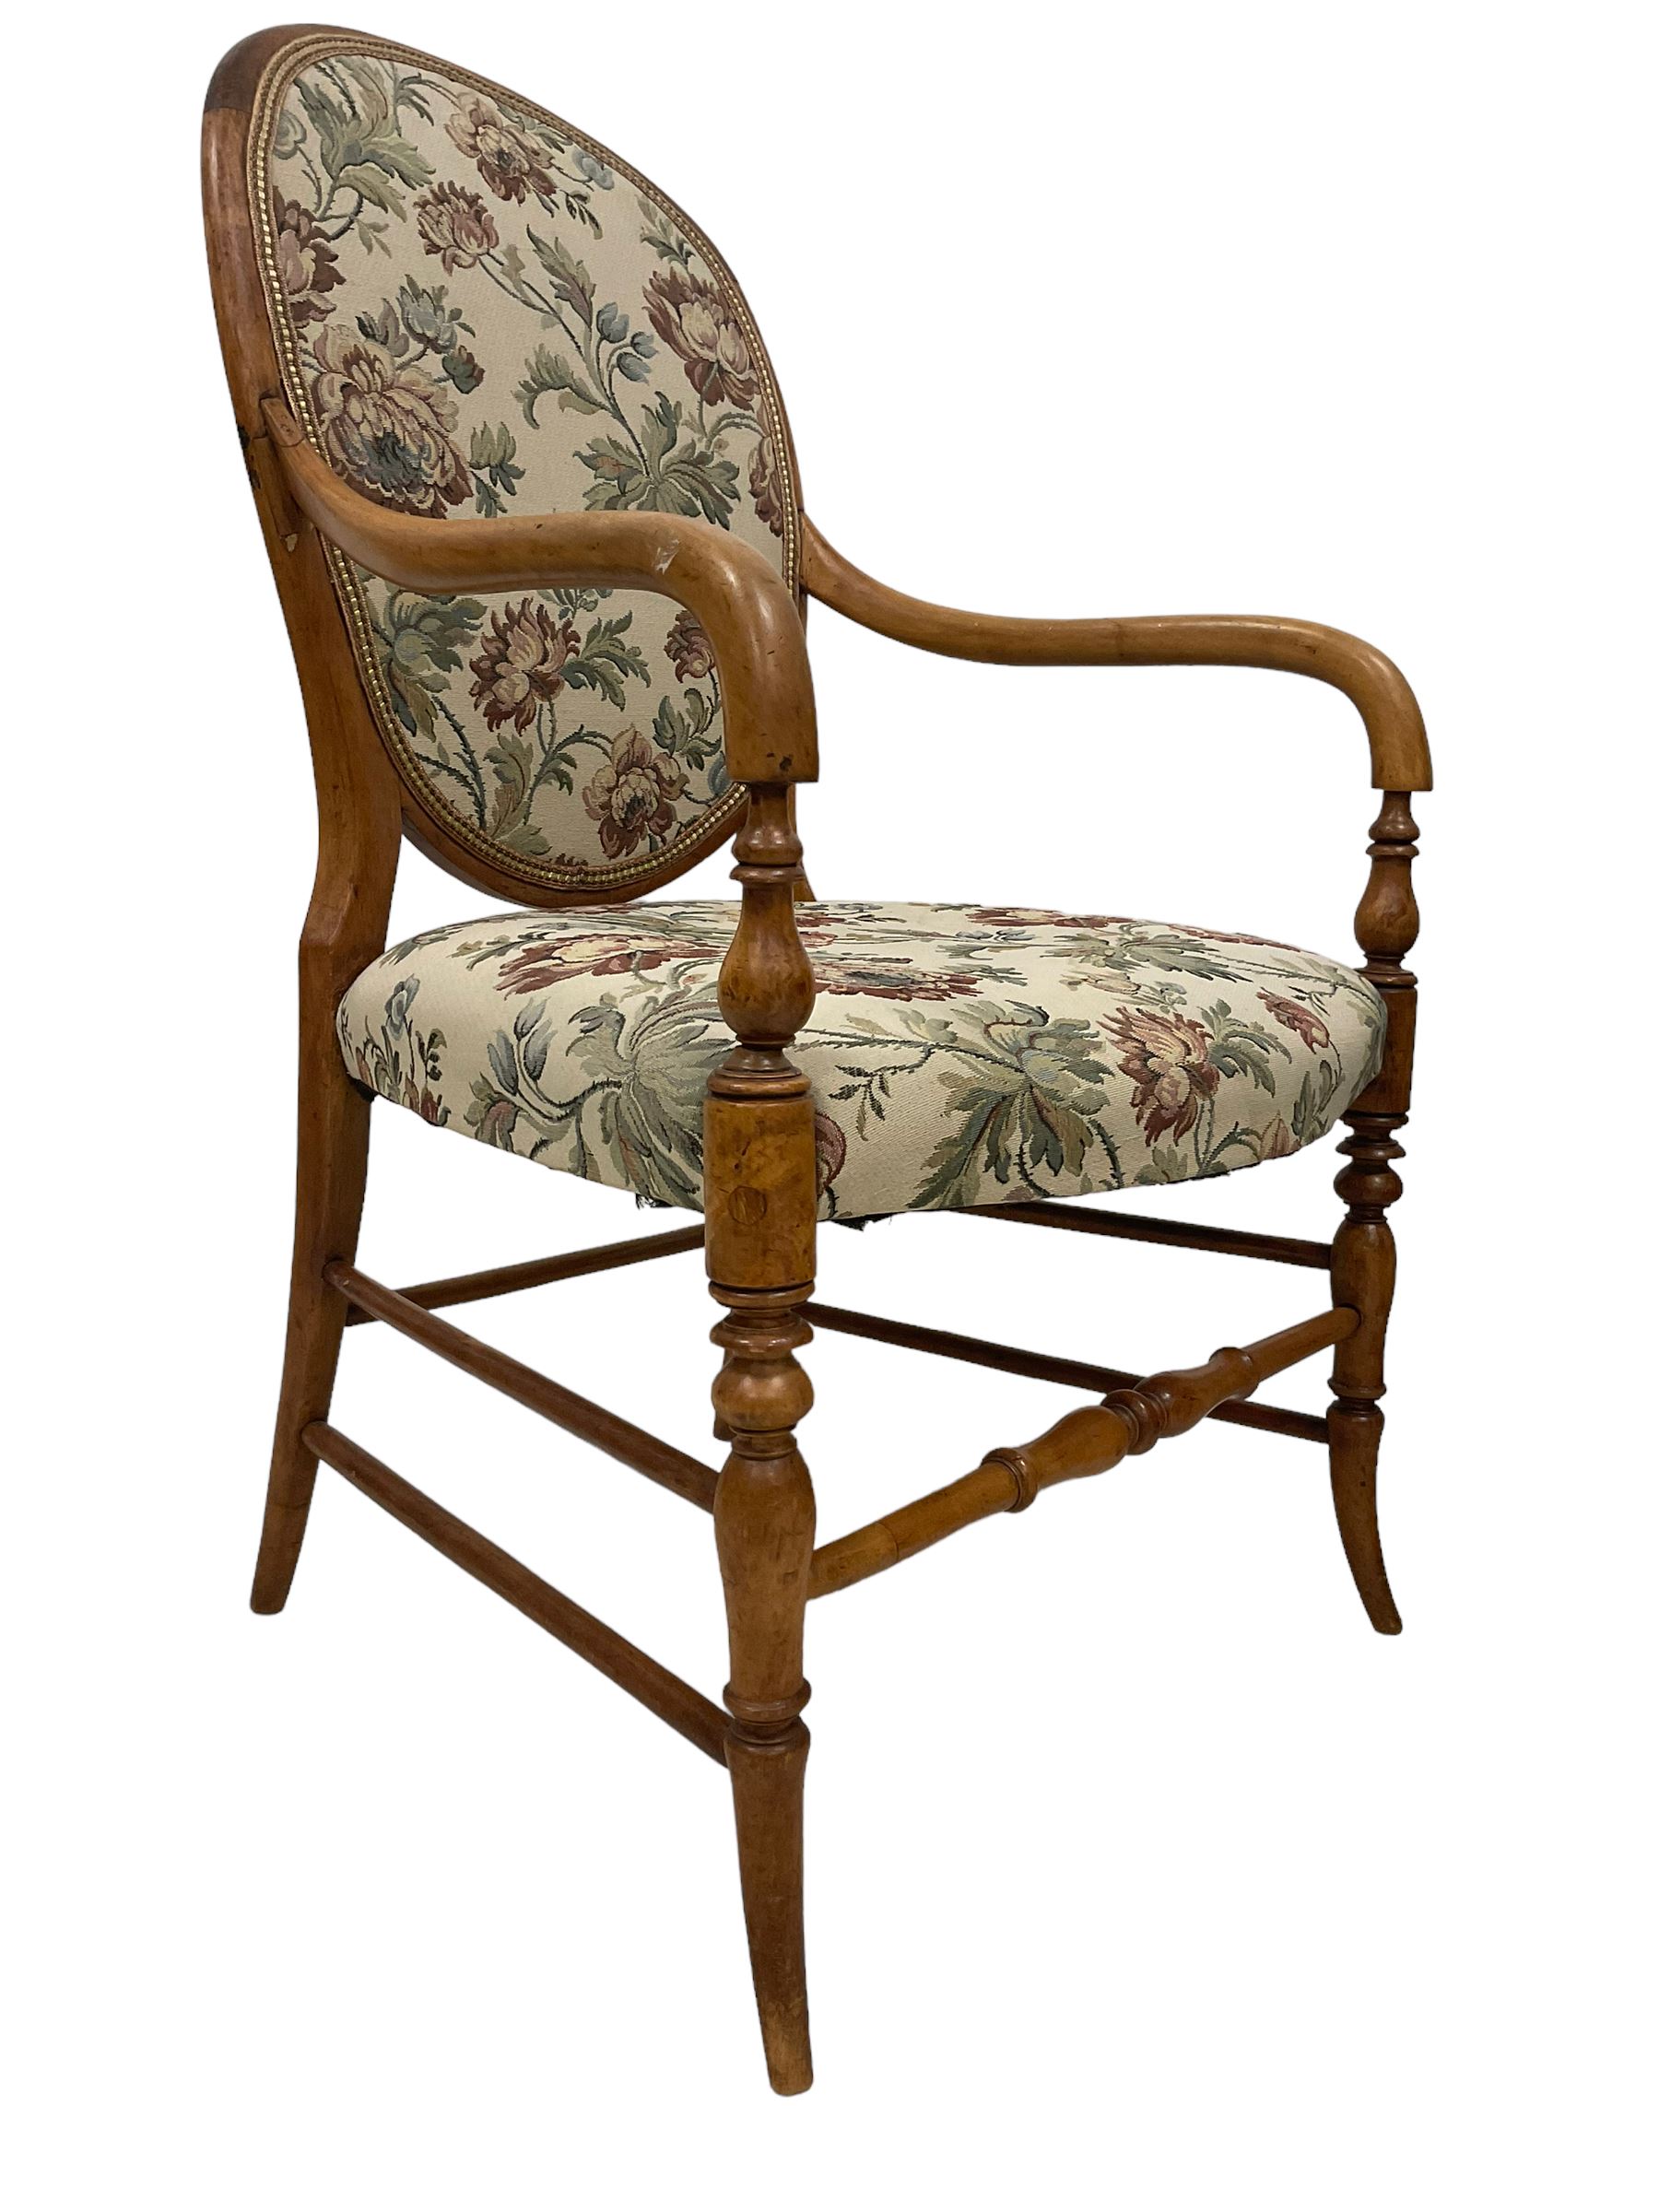 Victorian maple cameo back bedroom chair - Image 4 of 7